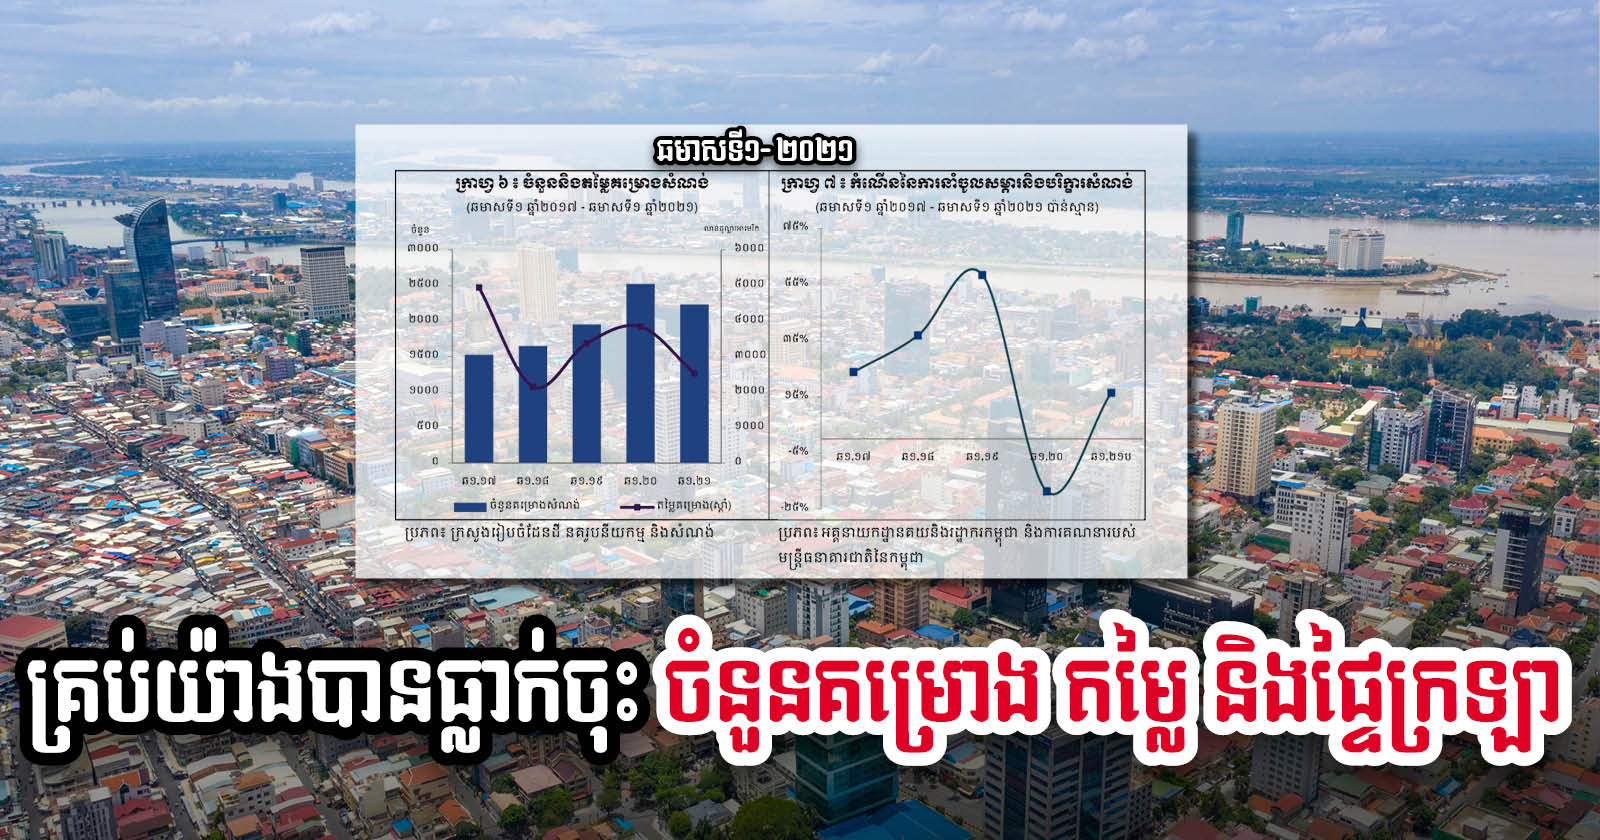 Number of Construction Projects, Value & Area in H1 Dropped by 11.4% 34.3% & 29.9% Respectively